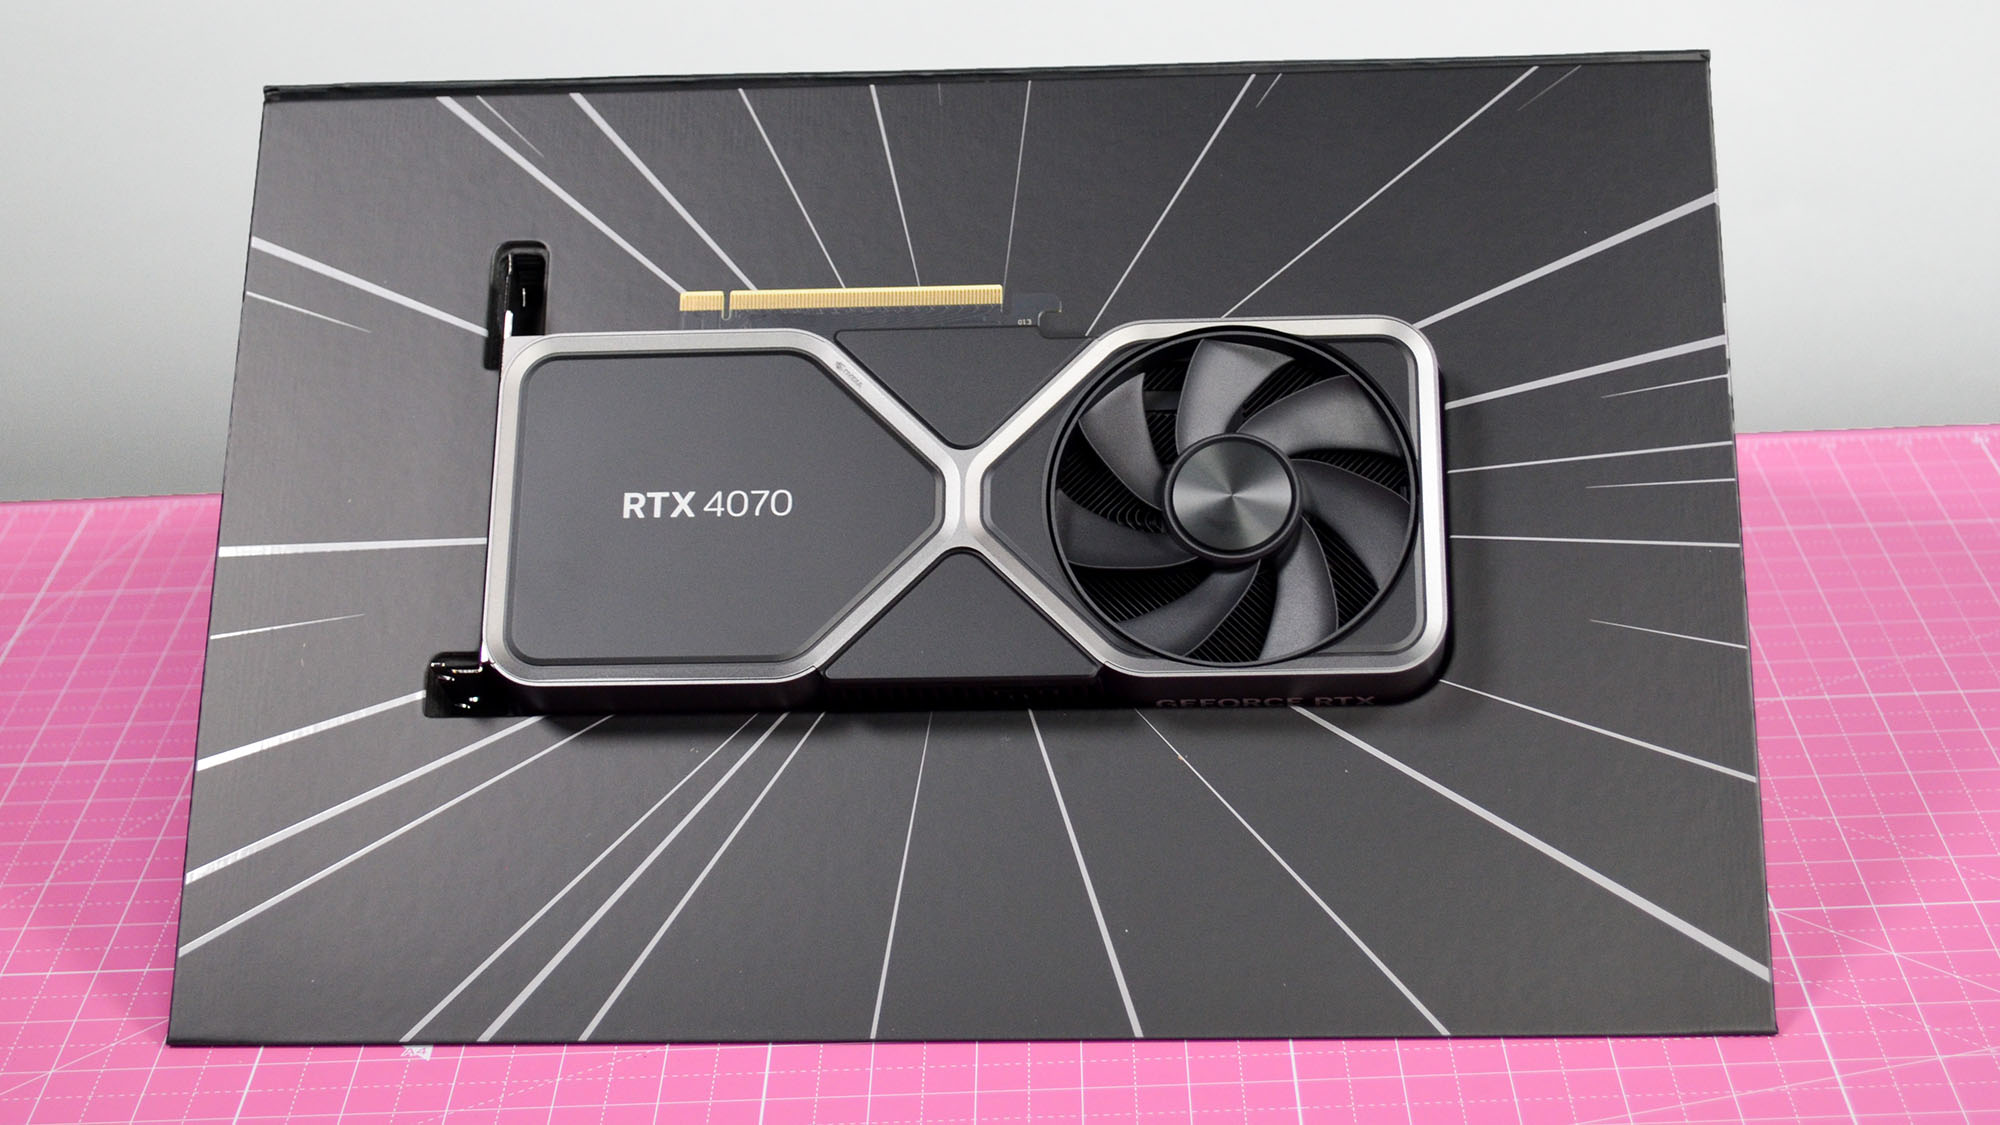 An Nvidia GeForce RTX 4070 graphics card seated inside its retail packaging